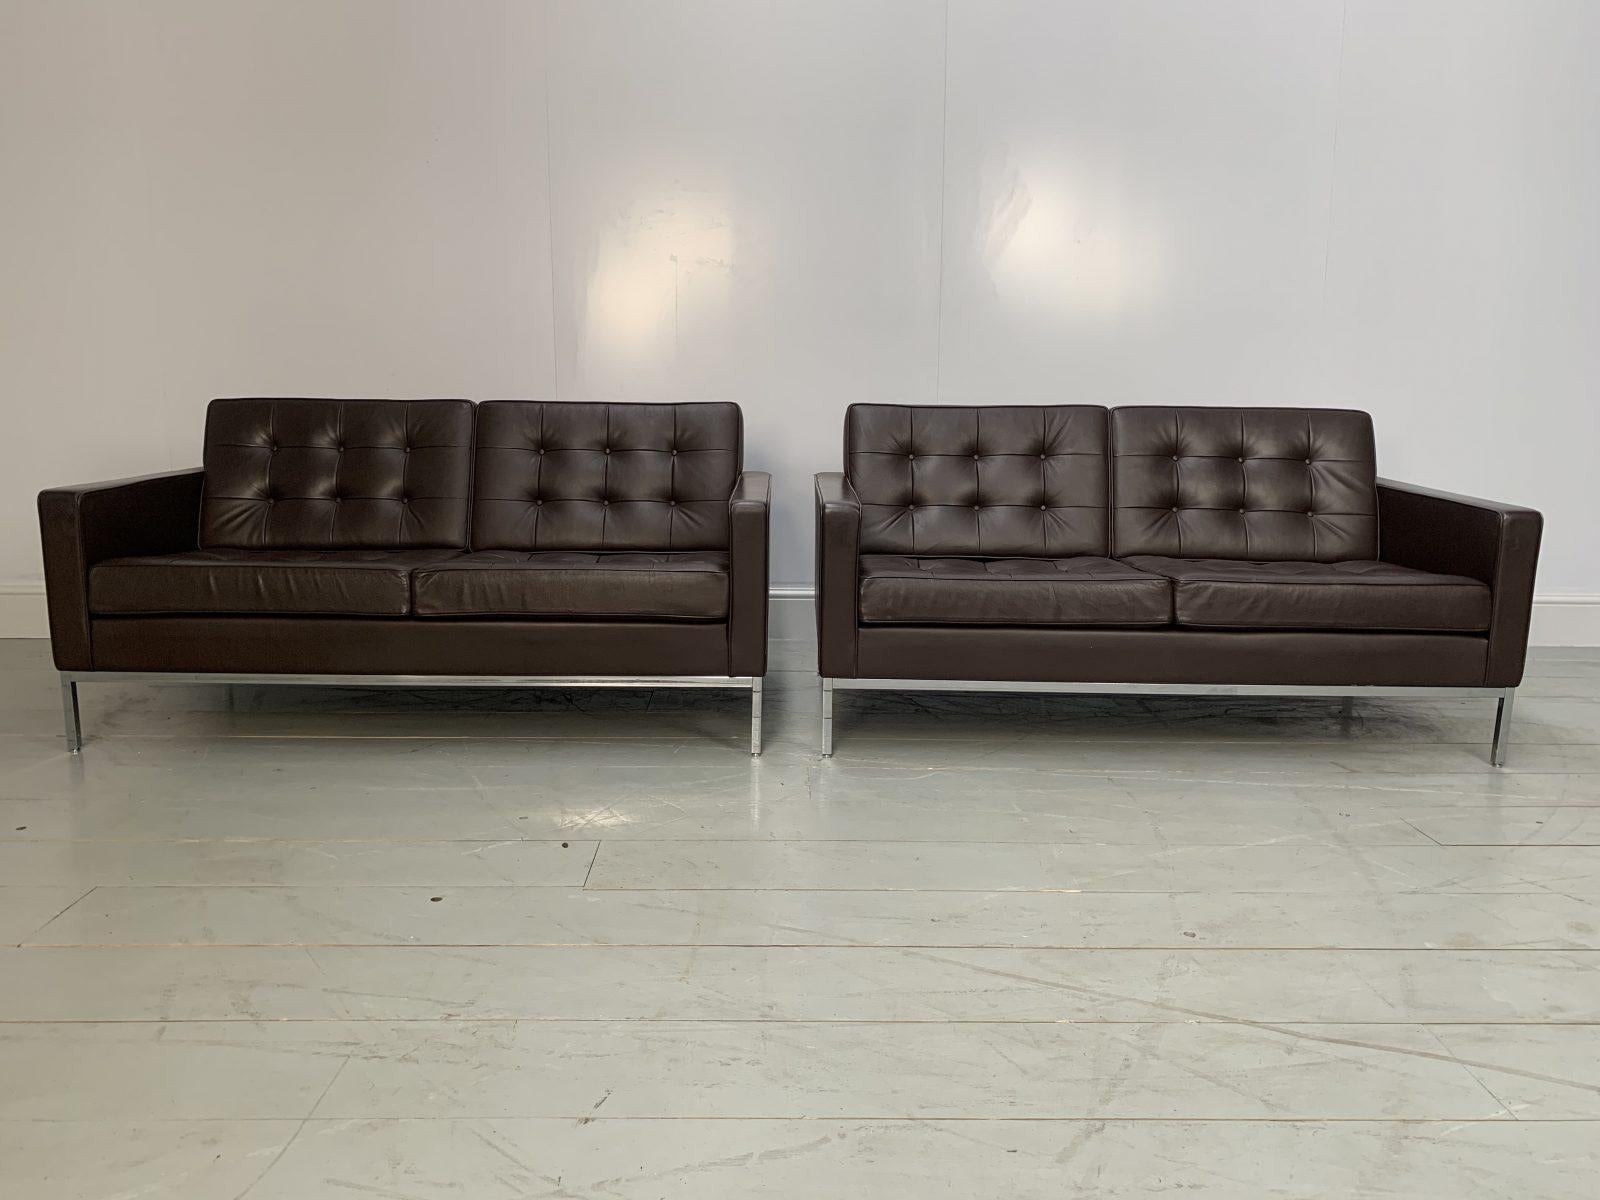 Pair of Knoll Studio “Florence Knoll” settee sofas in “Sabrina” mahogany brown leather

On offer on this occasion is a rare, original identical pair of “Florence Knoll” settee sofas from the world renown furniture house of Knoll Studio, dressed in